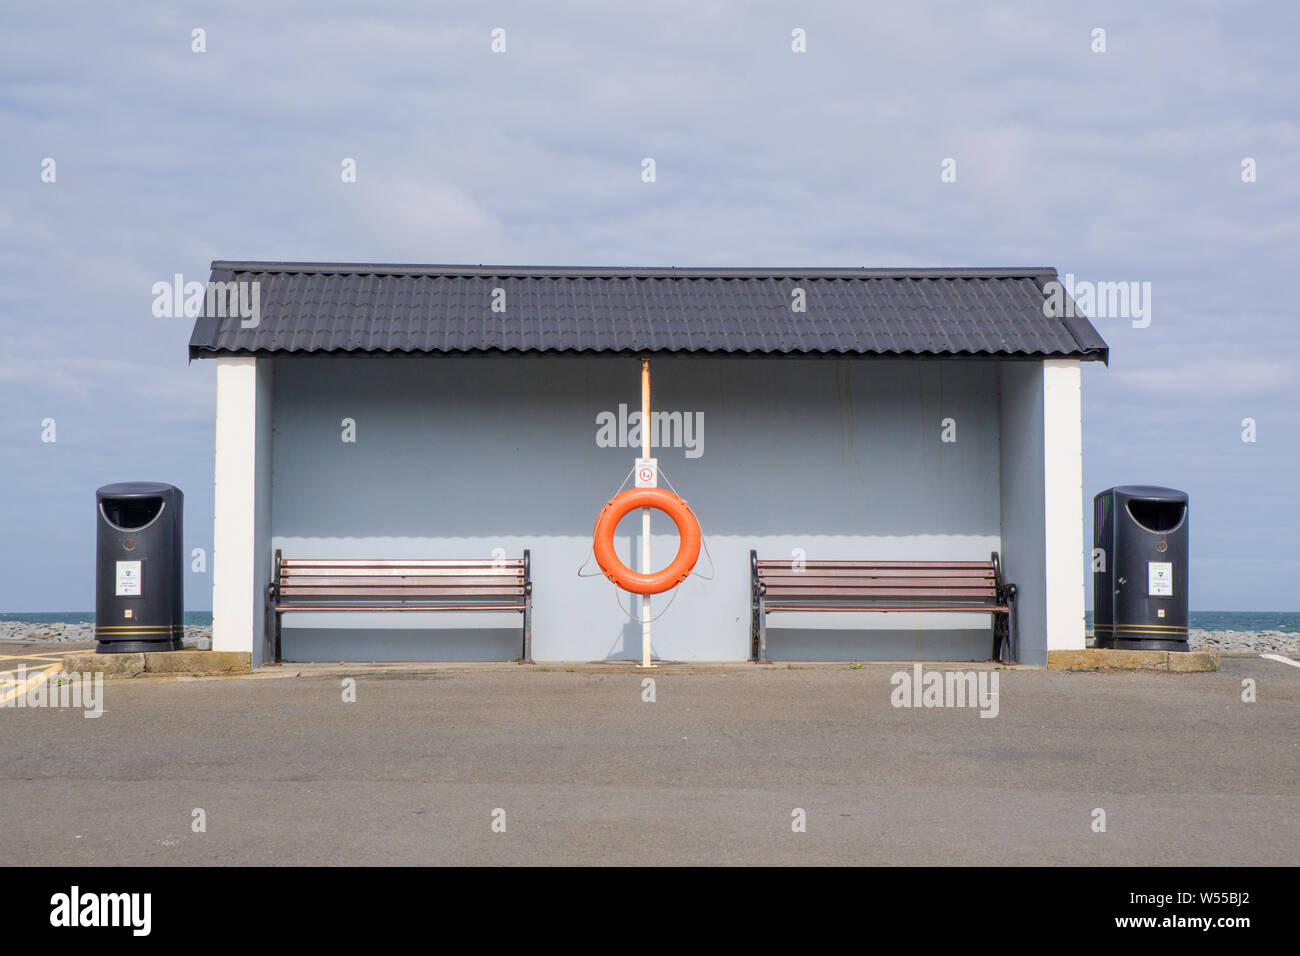 A rather dull weather shelter at a seaside resort overlooking a carpark, Britain, UK Stock Photo